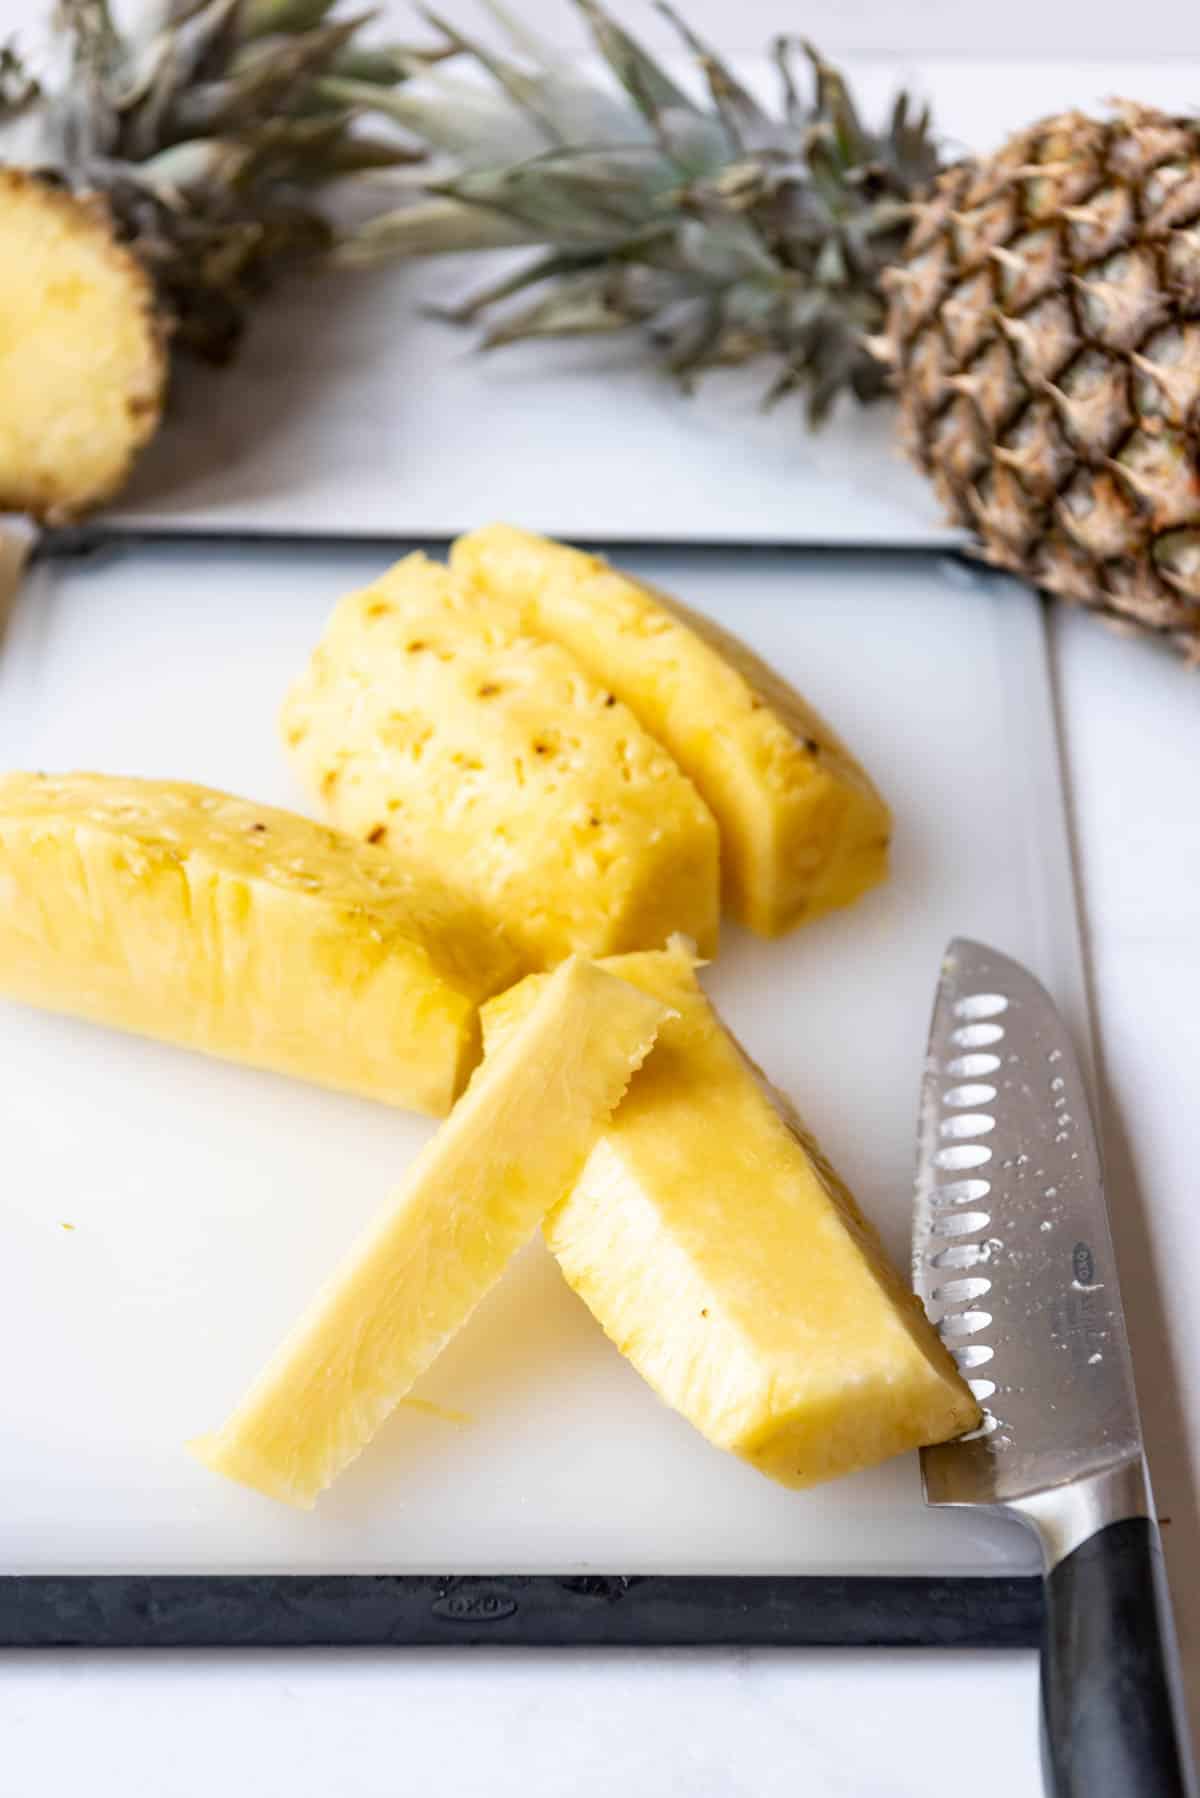 A knife on a cutting board with pineapple cut into wedges in front of a whole pineapple.